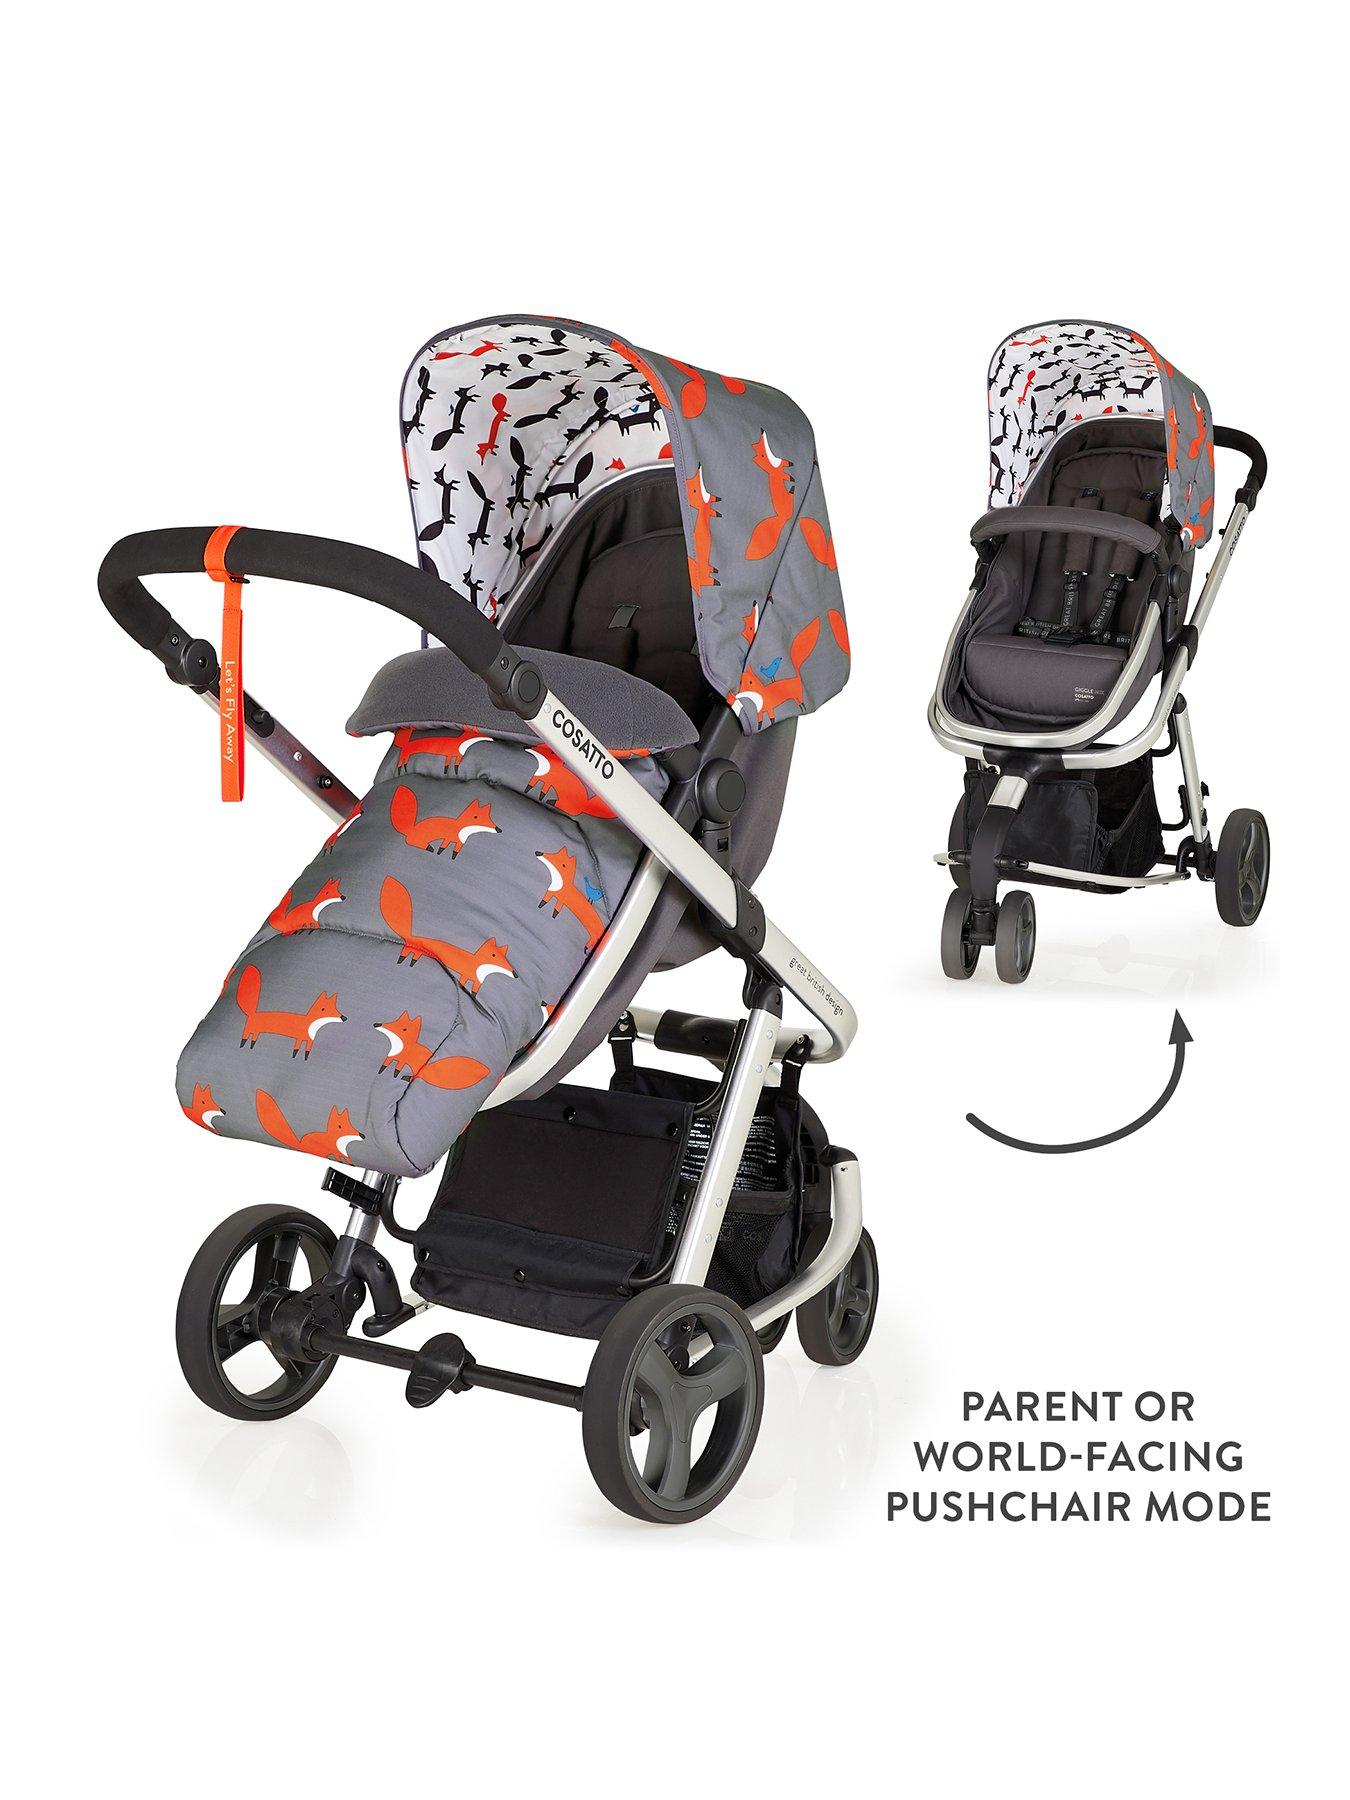 cosatto giggle pushchair